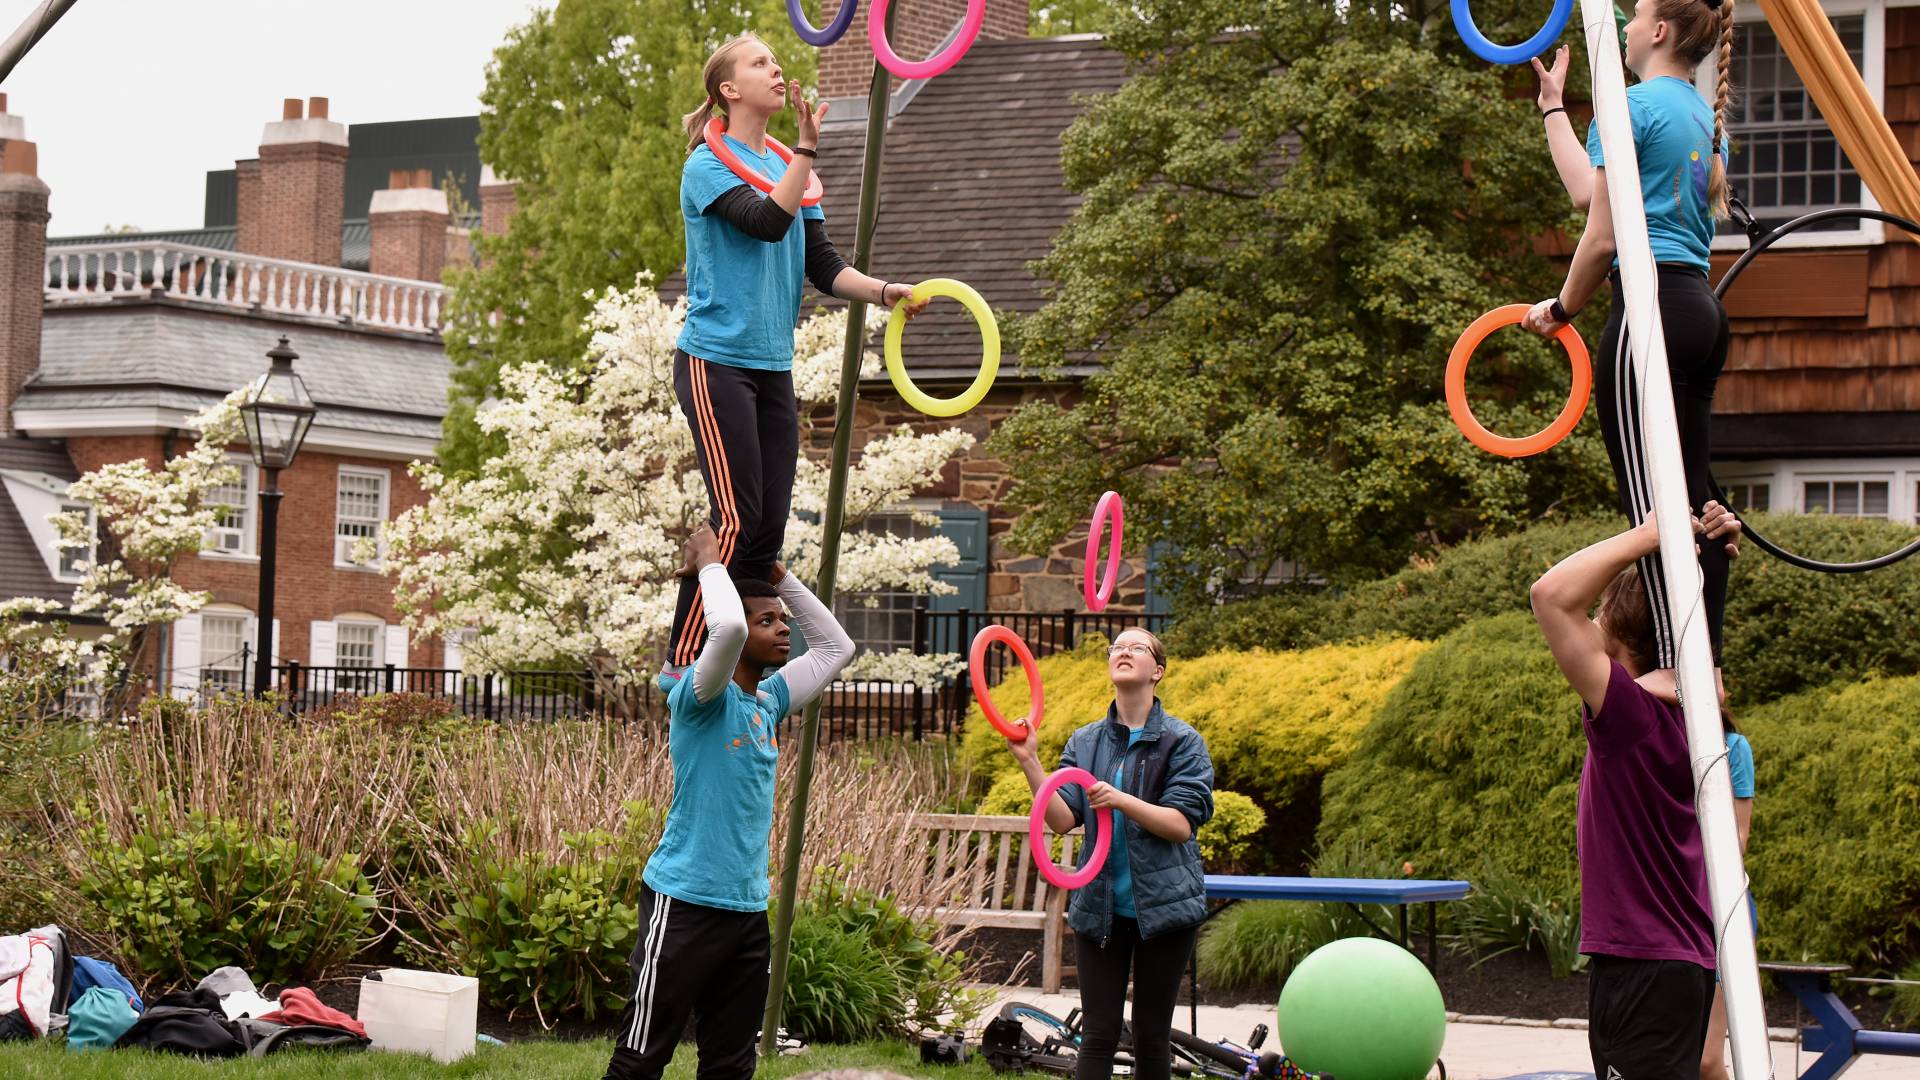 2 women juggling colorful rings while standing on the shoulders of 2 young men